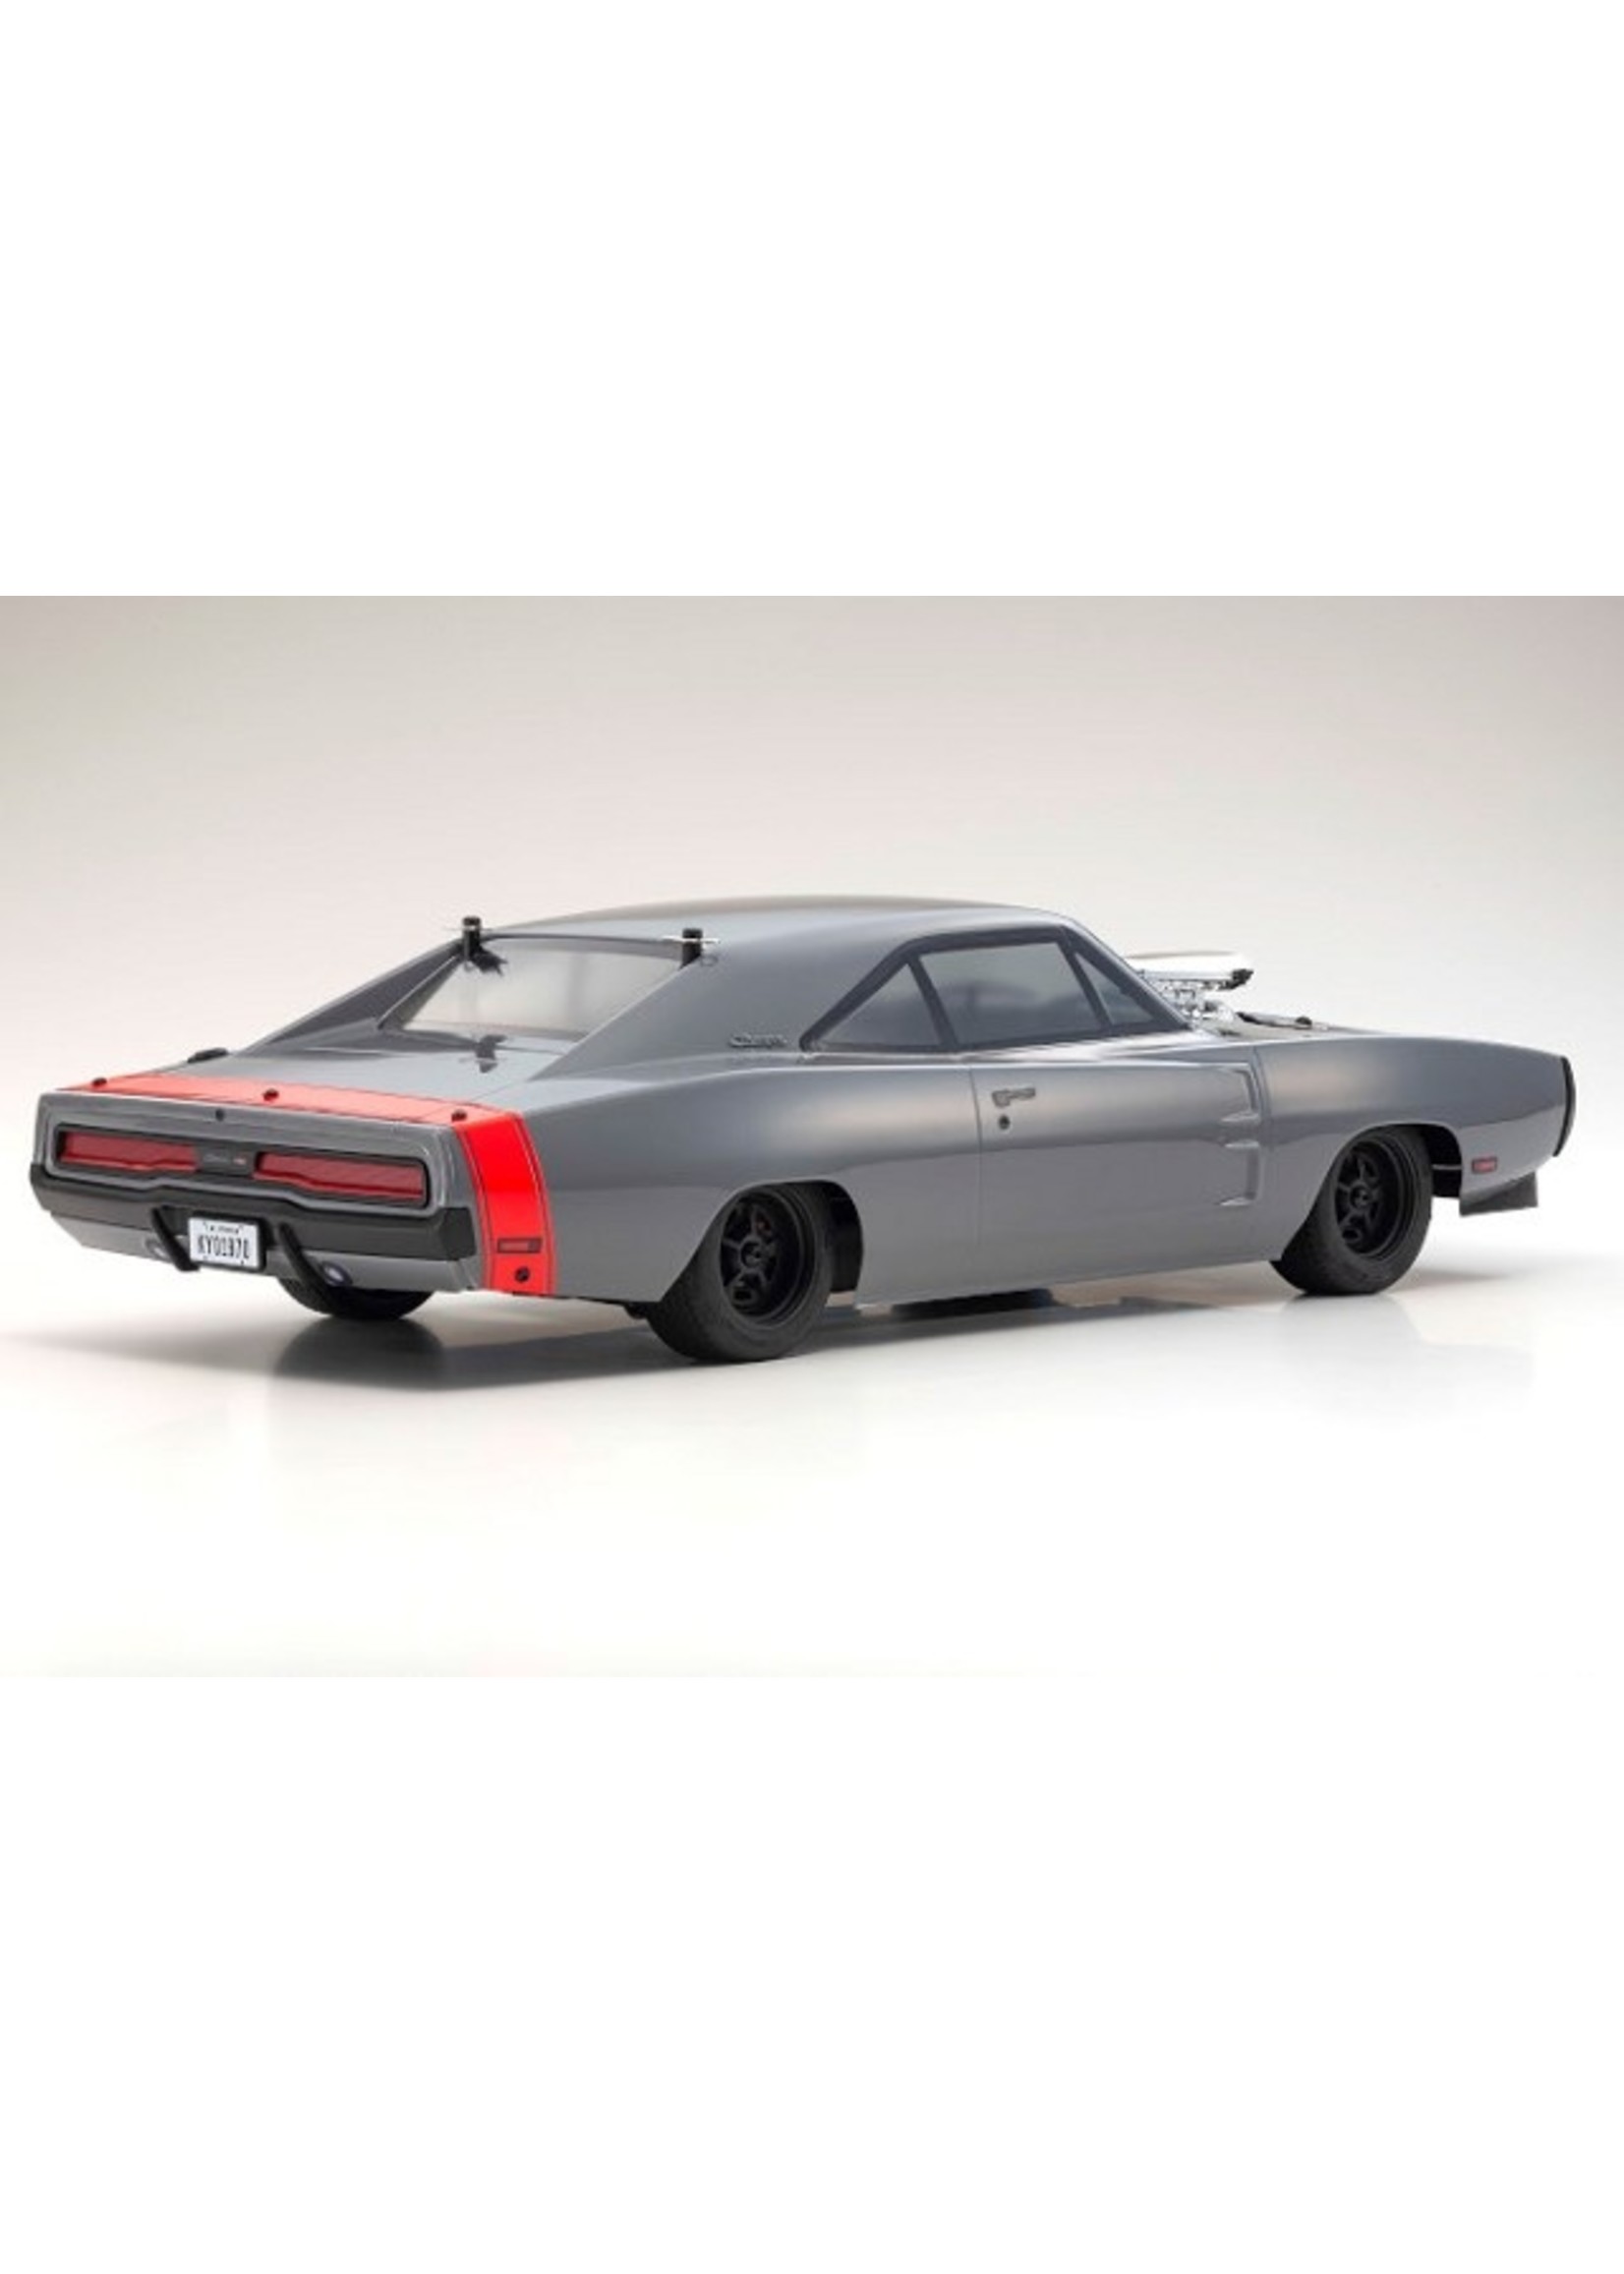 Kyosho 1/10 Fazer Mk2 1970 Dodge Charger VE Supercharged - Gray